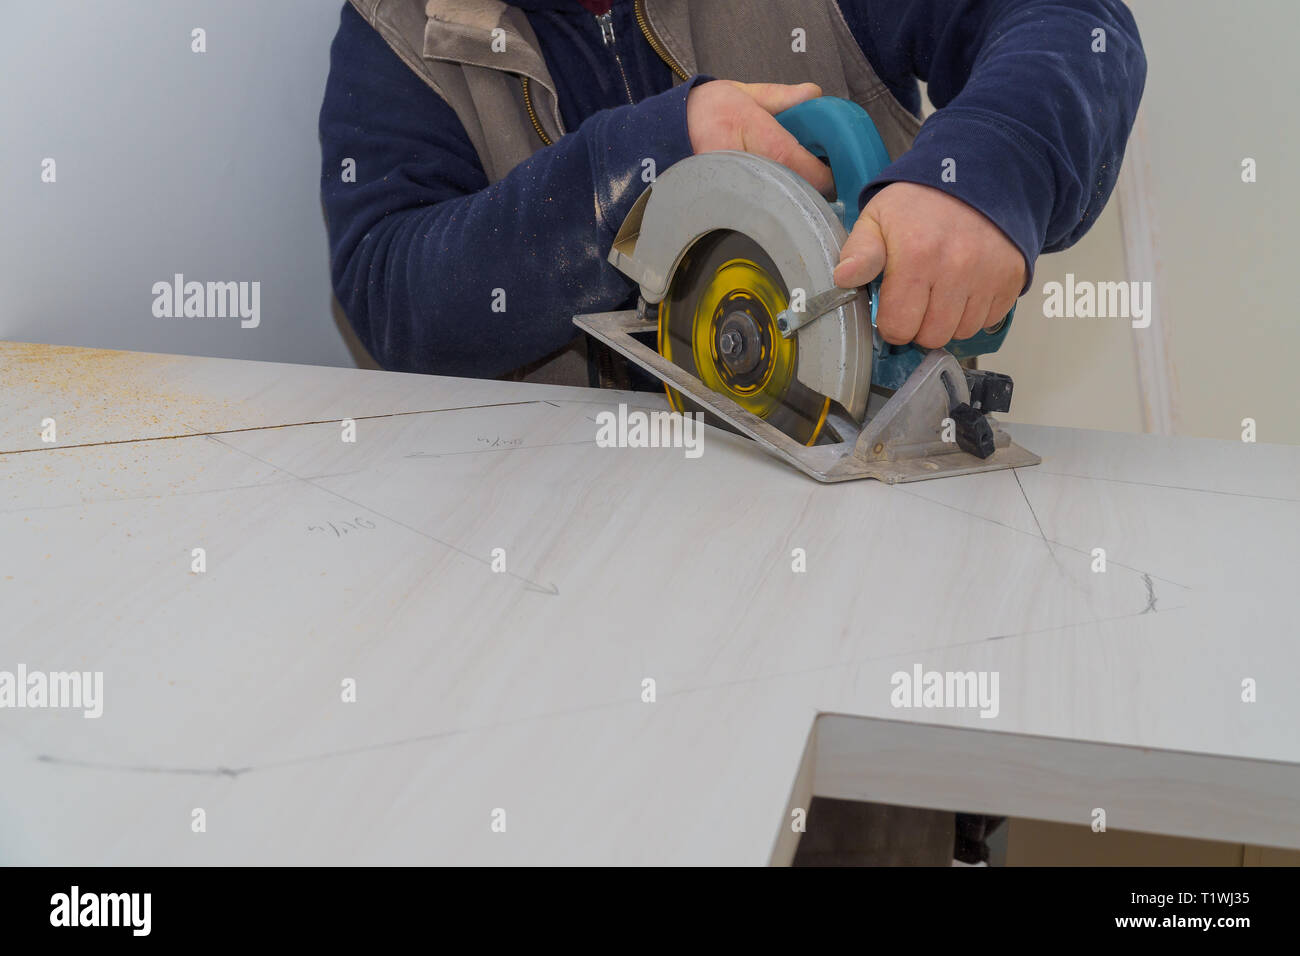 Carpenter Using Electric Saw To Cut Laminate Counter Top During A